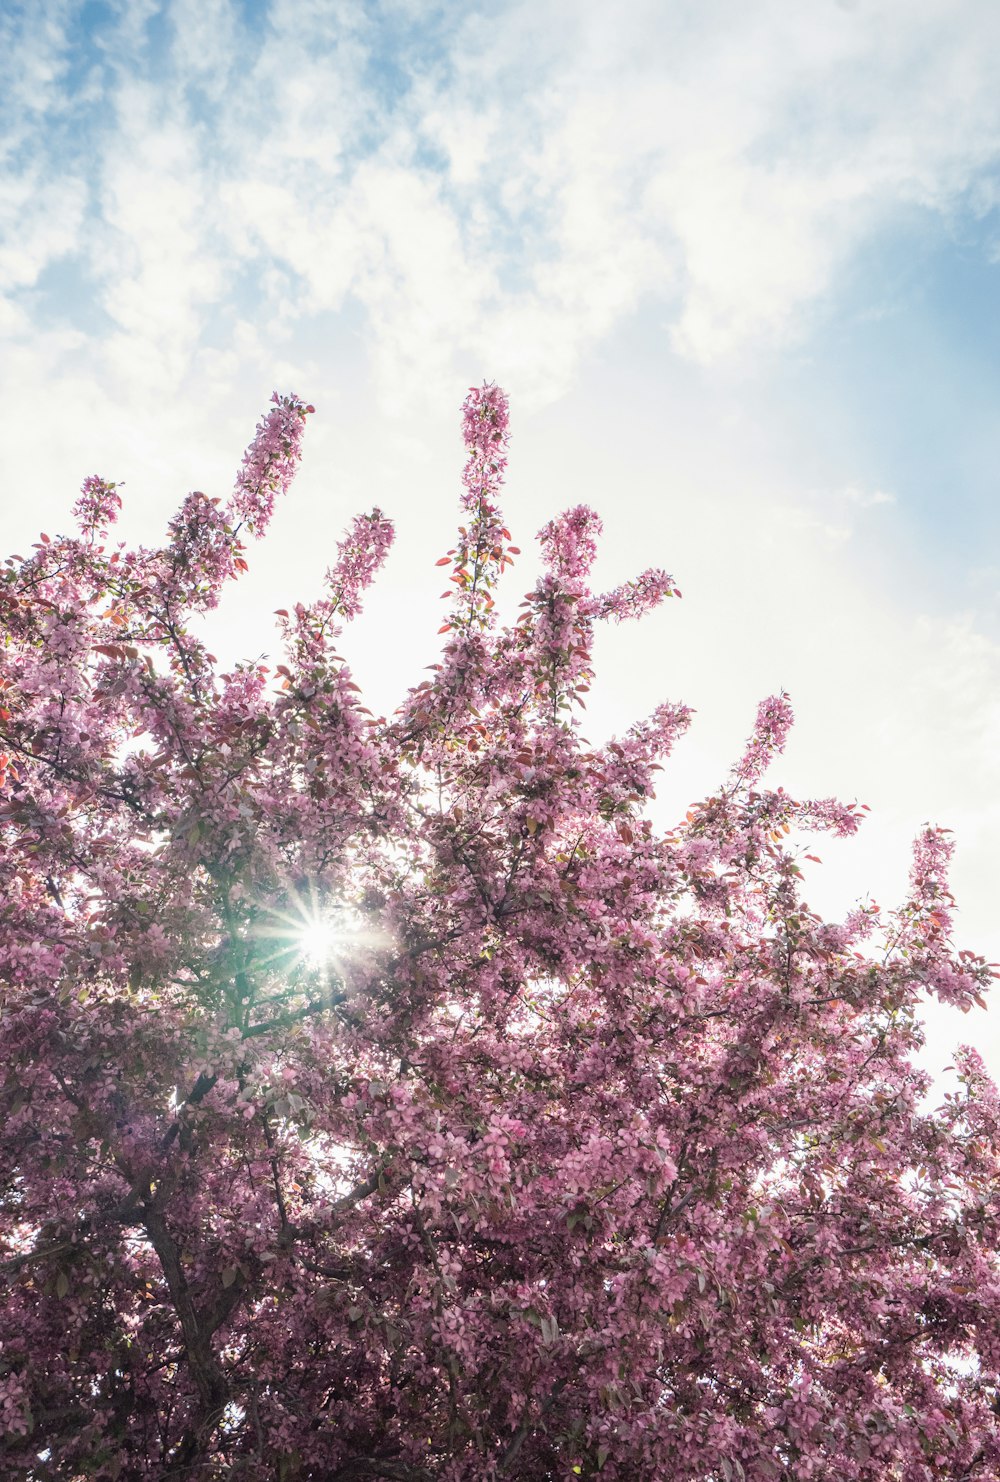 the sun shines through the branches of a flowering tree